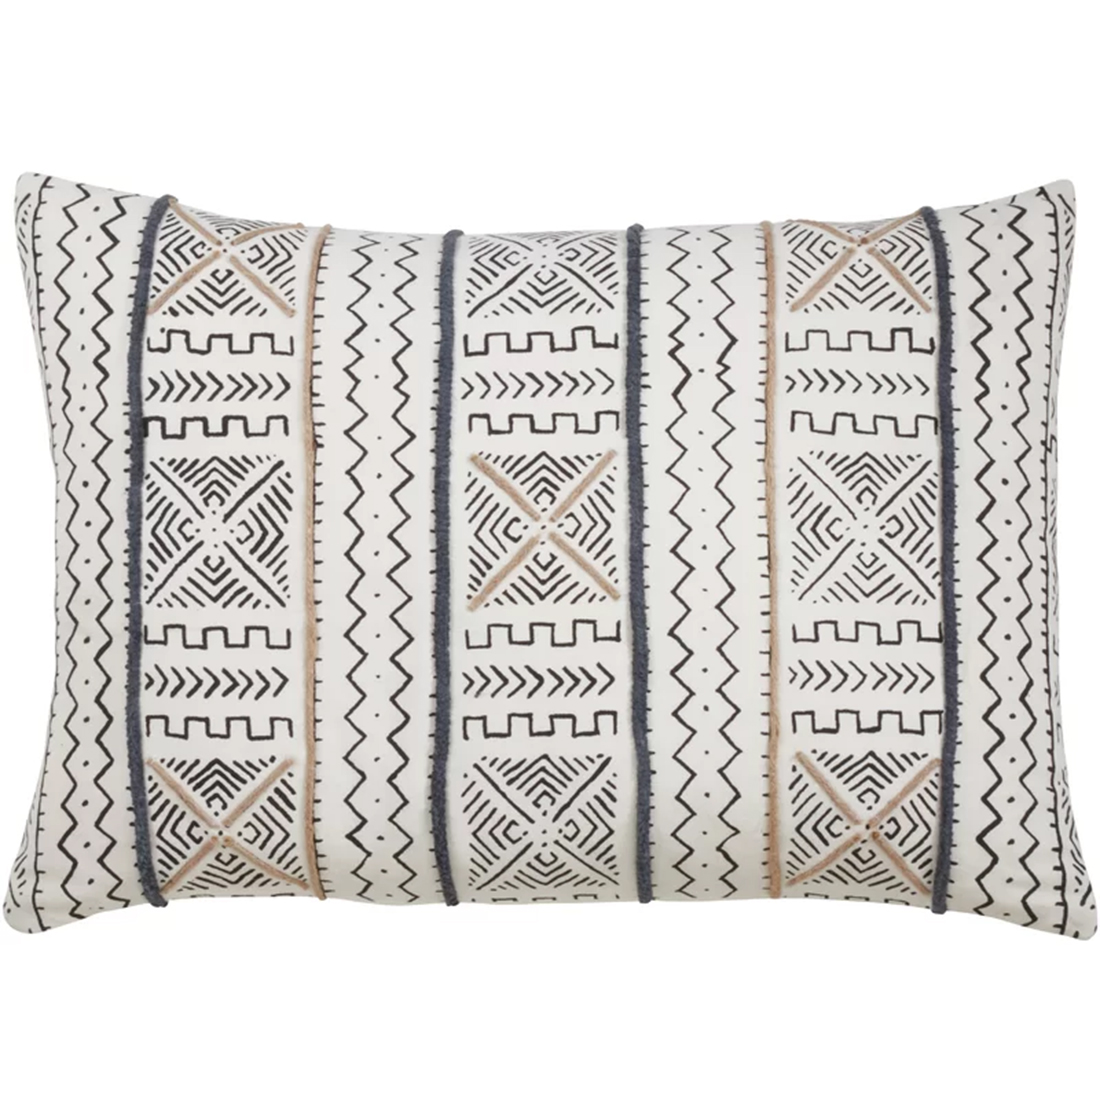 Fennco Styles Modern Mud Cloth Design 100% Cotton Decorative Throw Pillow Cover & Insert 14 x 20 Inch White Multi - image 1 of 3